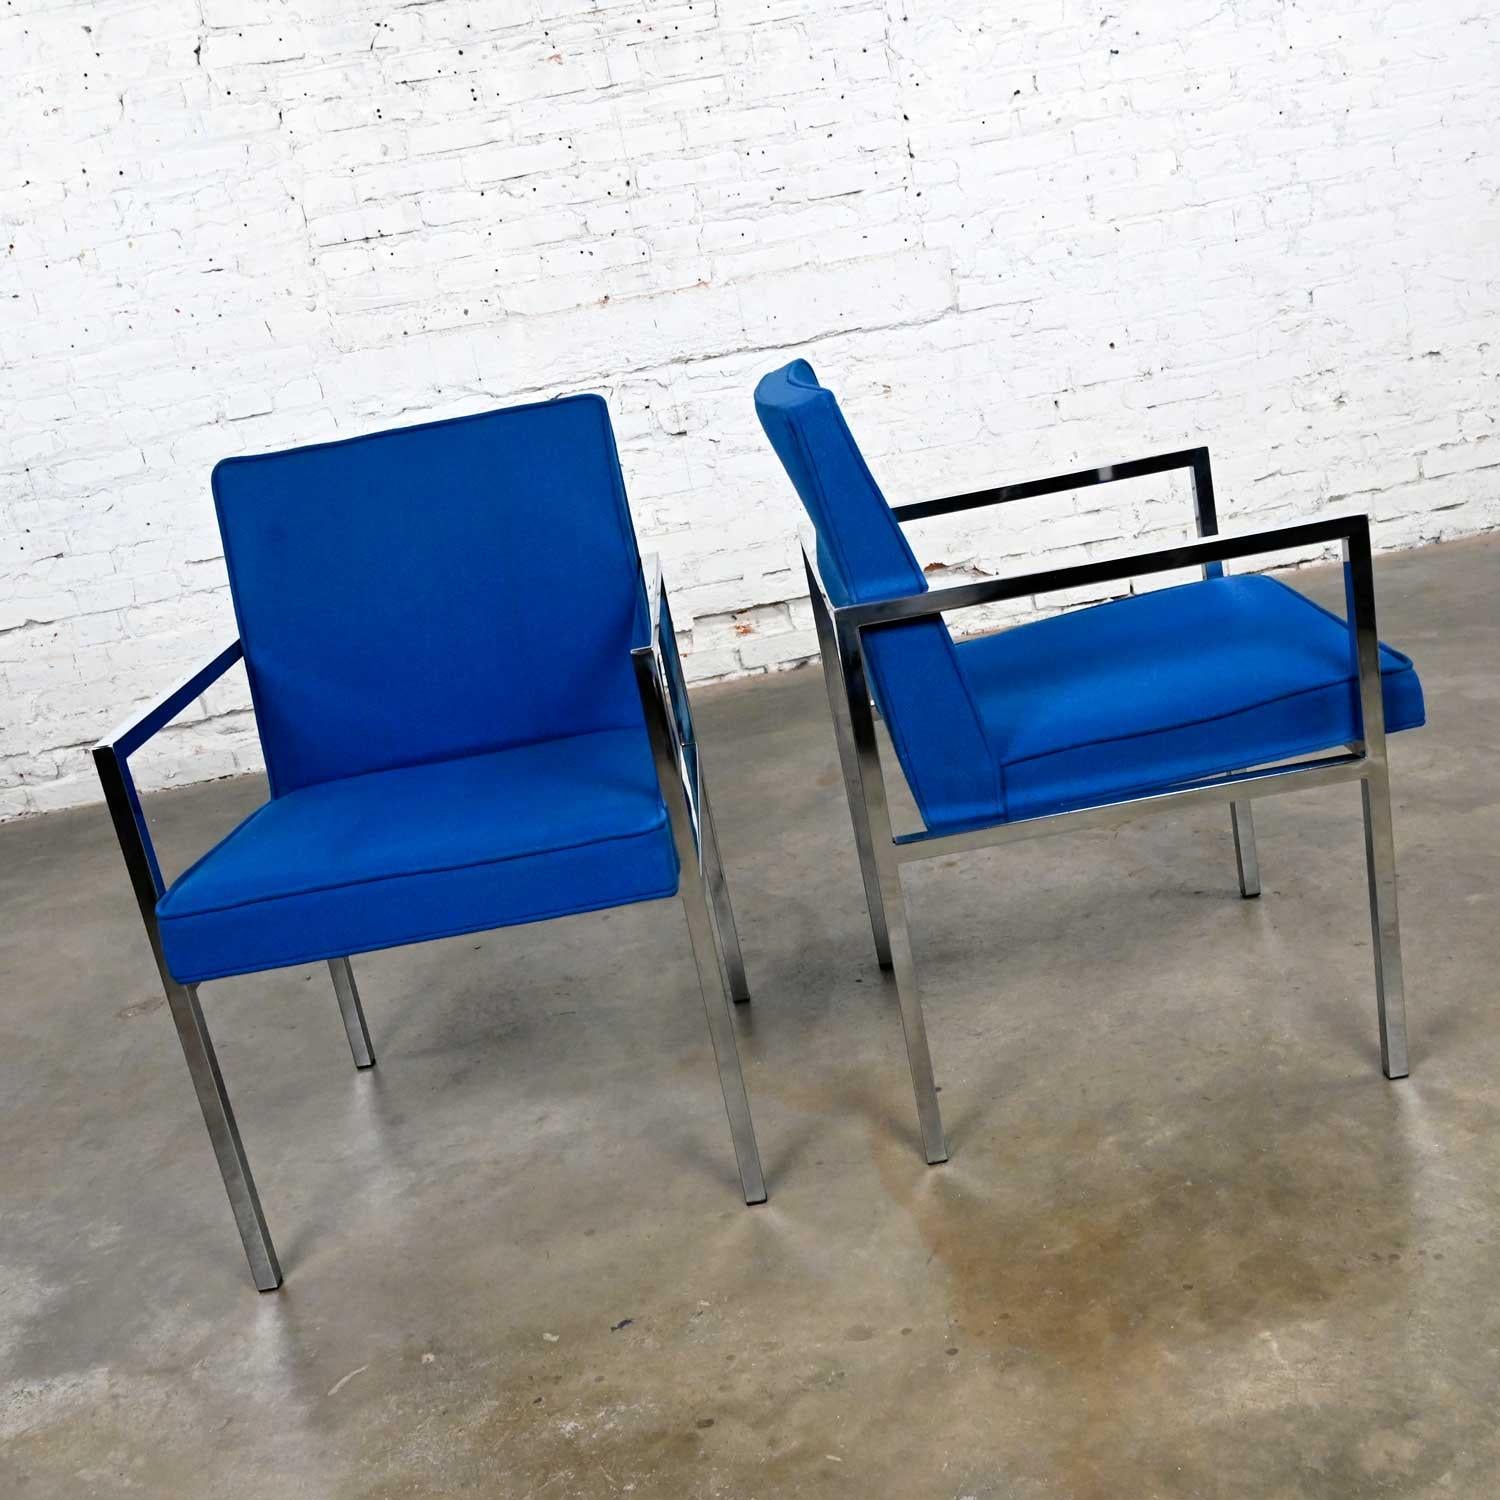 Mid-Century Modern Vintage MCM Chrome & Royal Blue Fabric Armchairs by Hibriten Chair Company For Sale